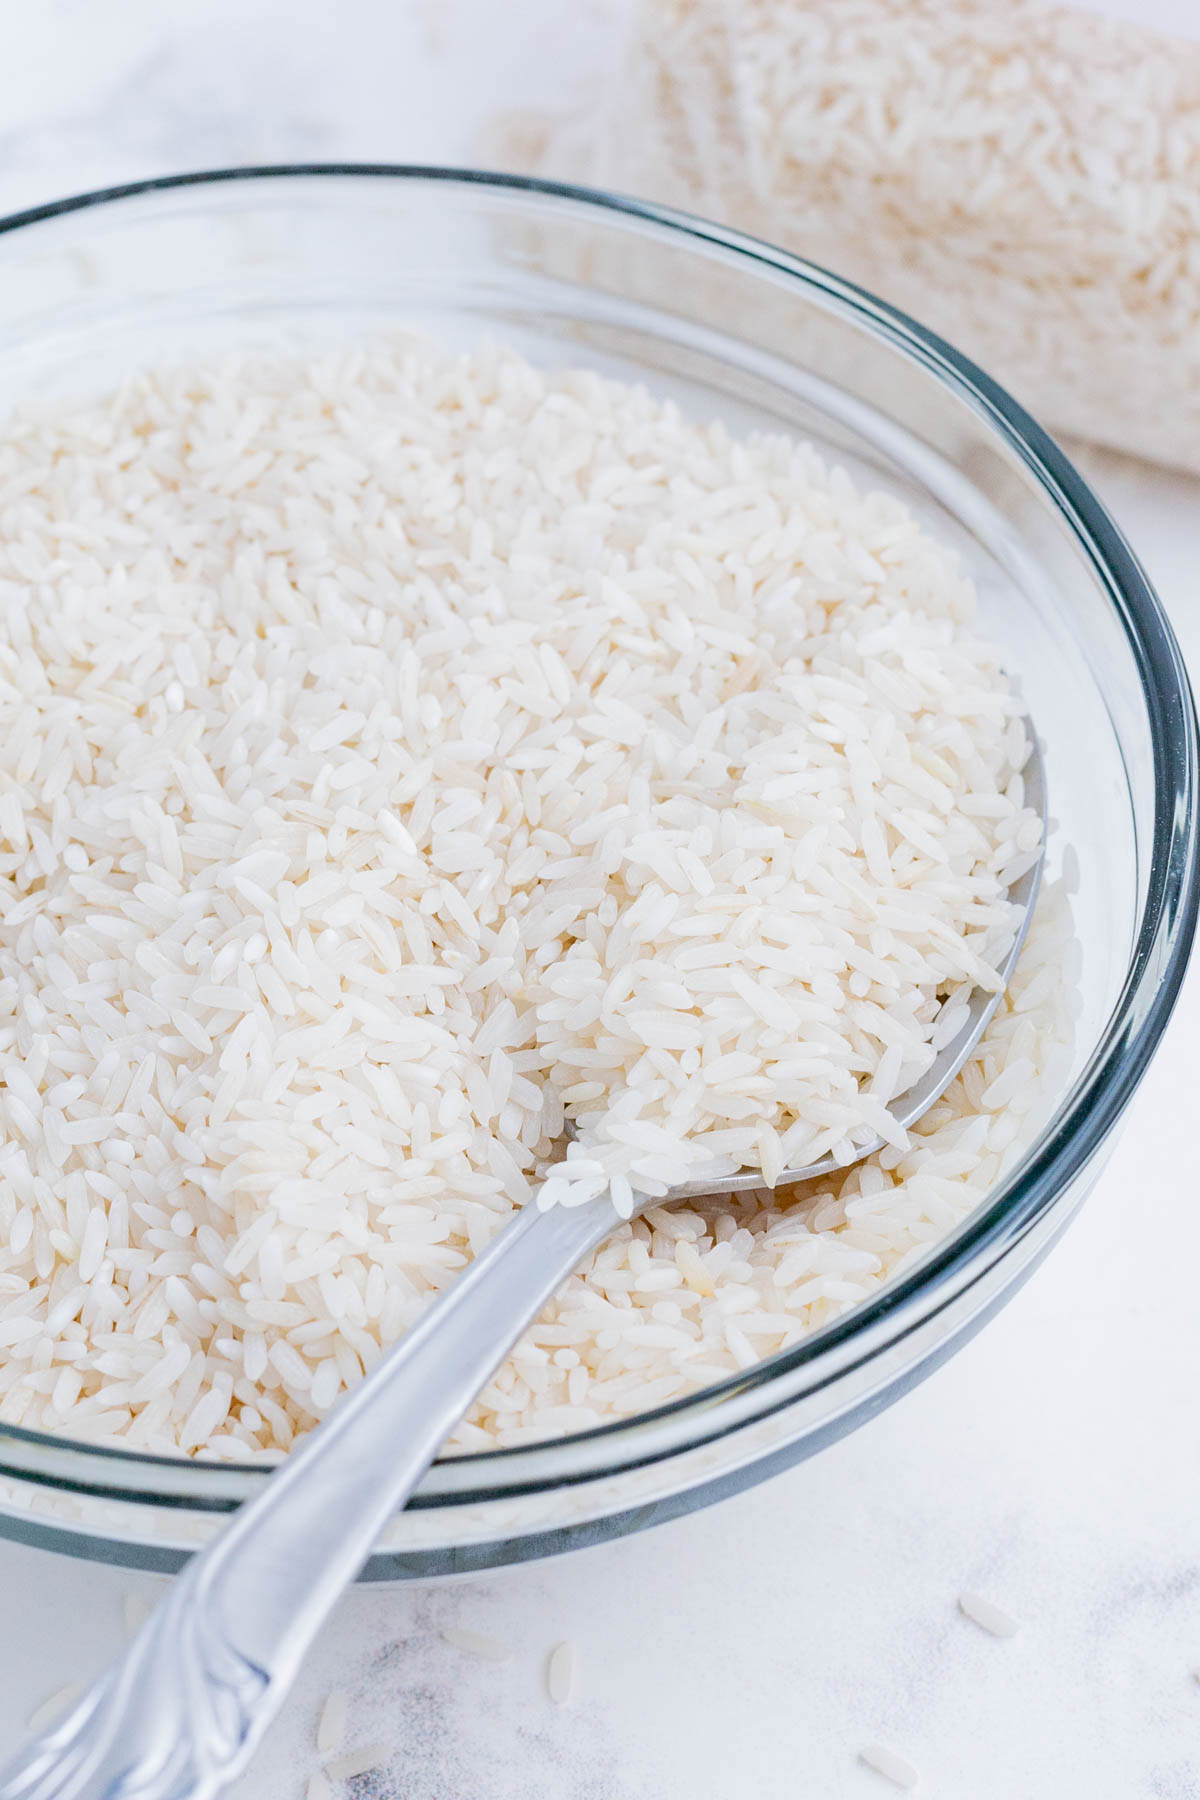 A spoon scoops white rice out of a glass bowl.